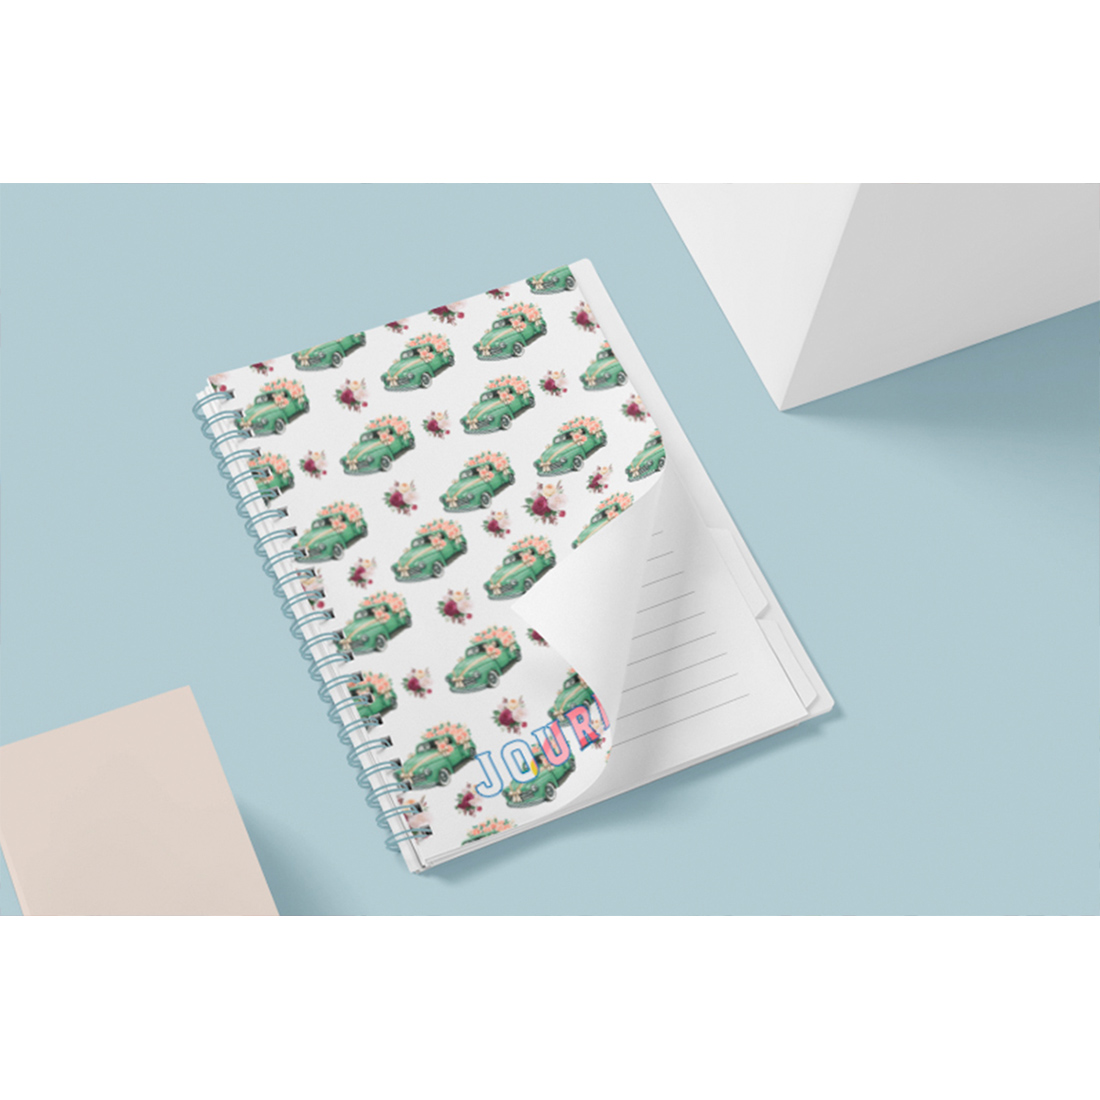 Notebook with a cute green cars.